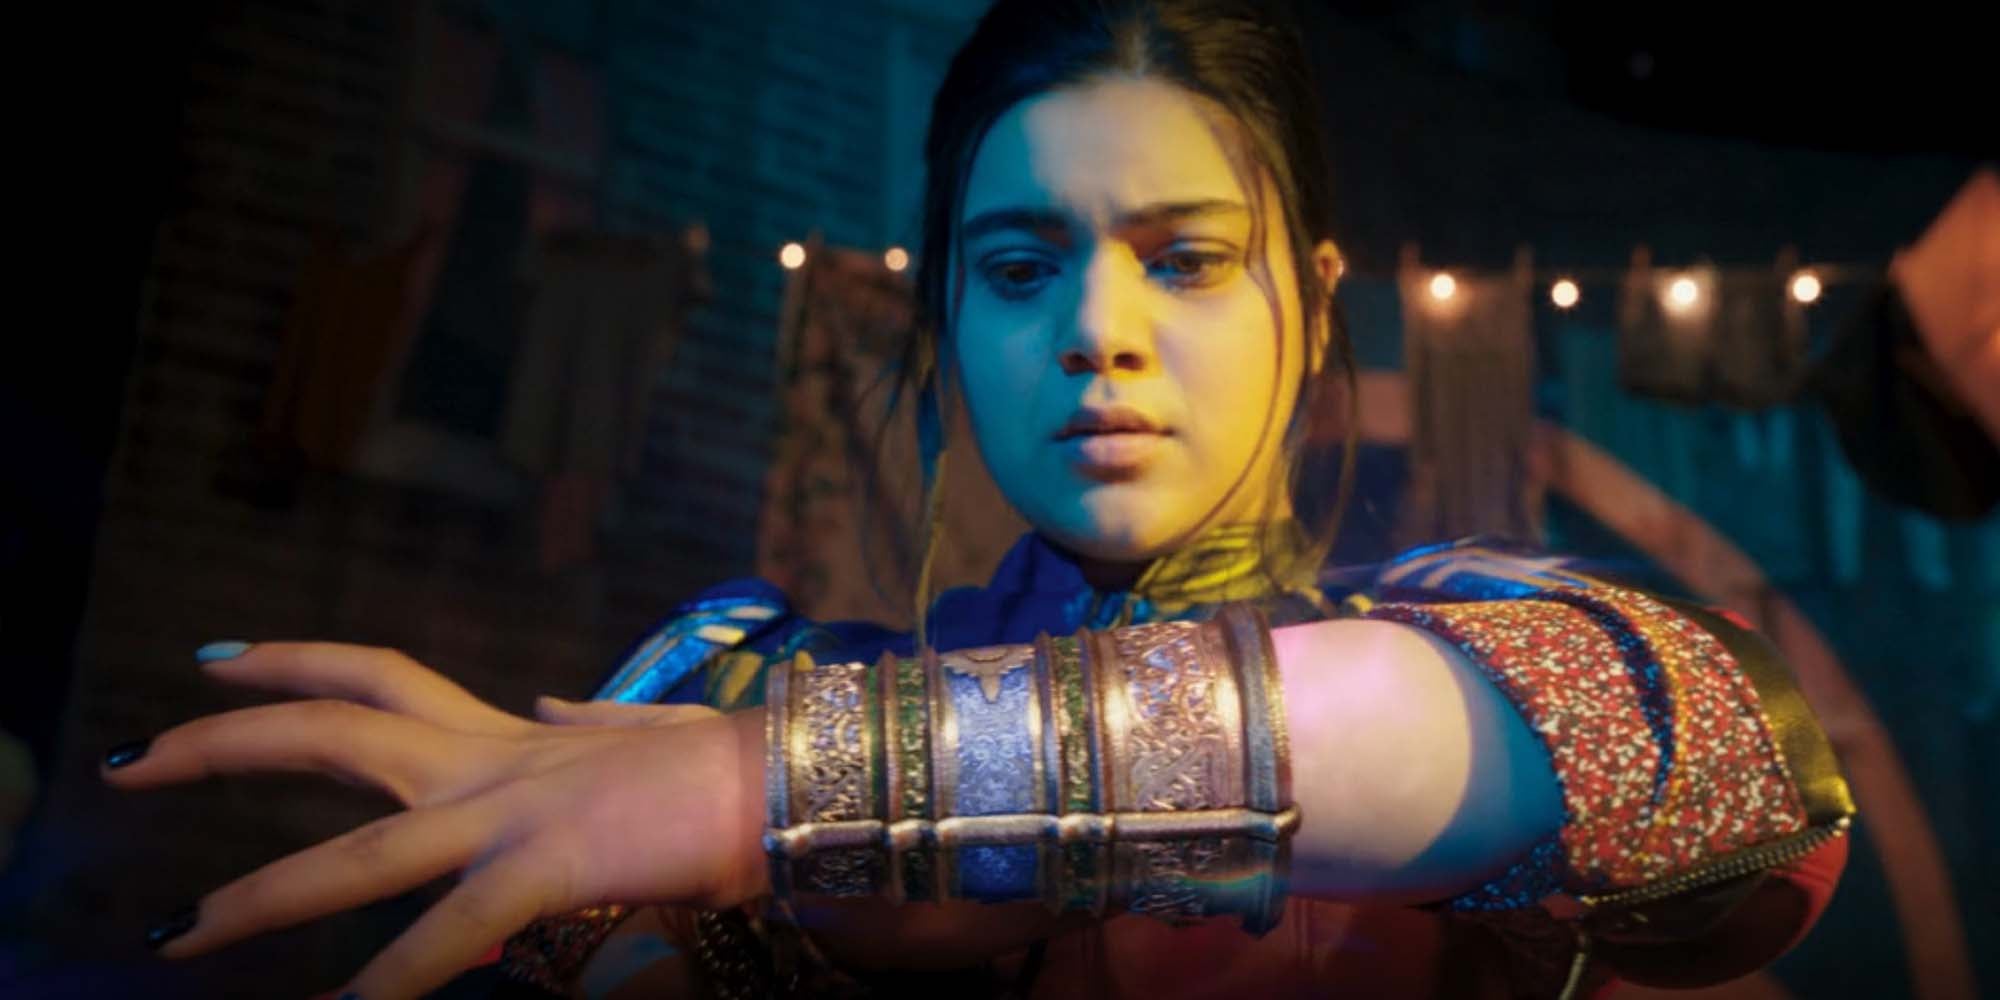 Ms marvel bangles: In a screencap from the Disney+ show Ms. Marvel, Kamala Khan, played by Iman Vellani, looks at the jewelry on her wrist as she realizes they are superpowered.